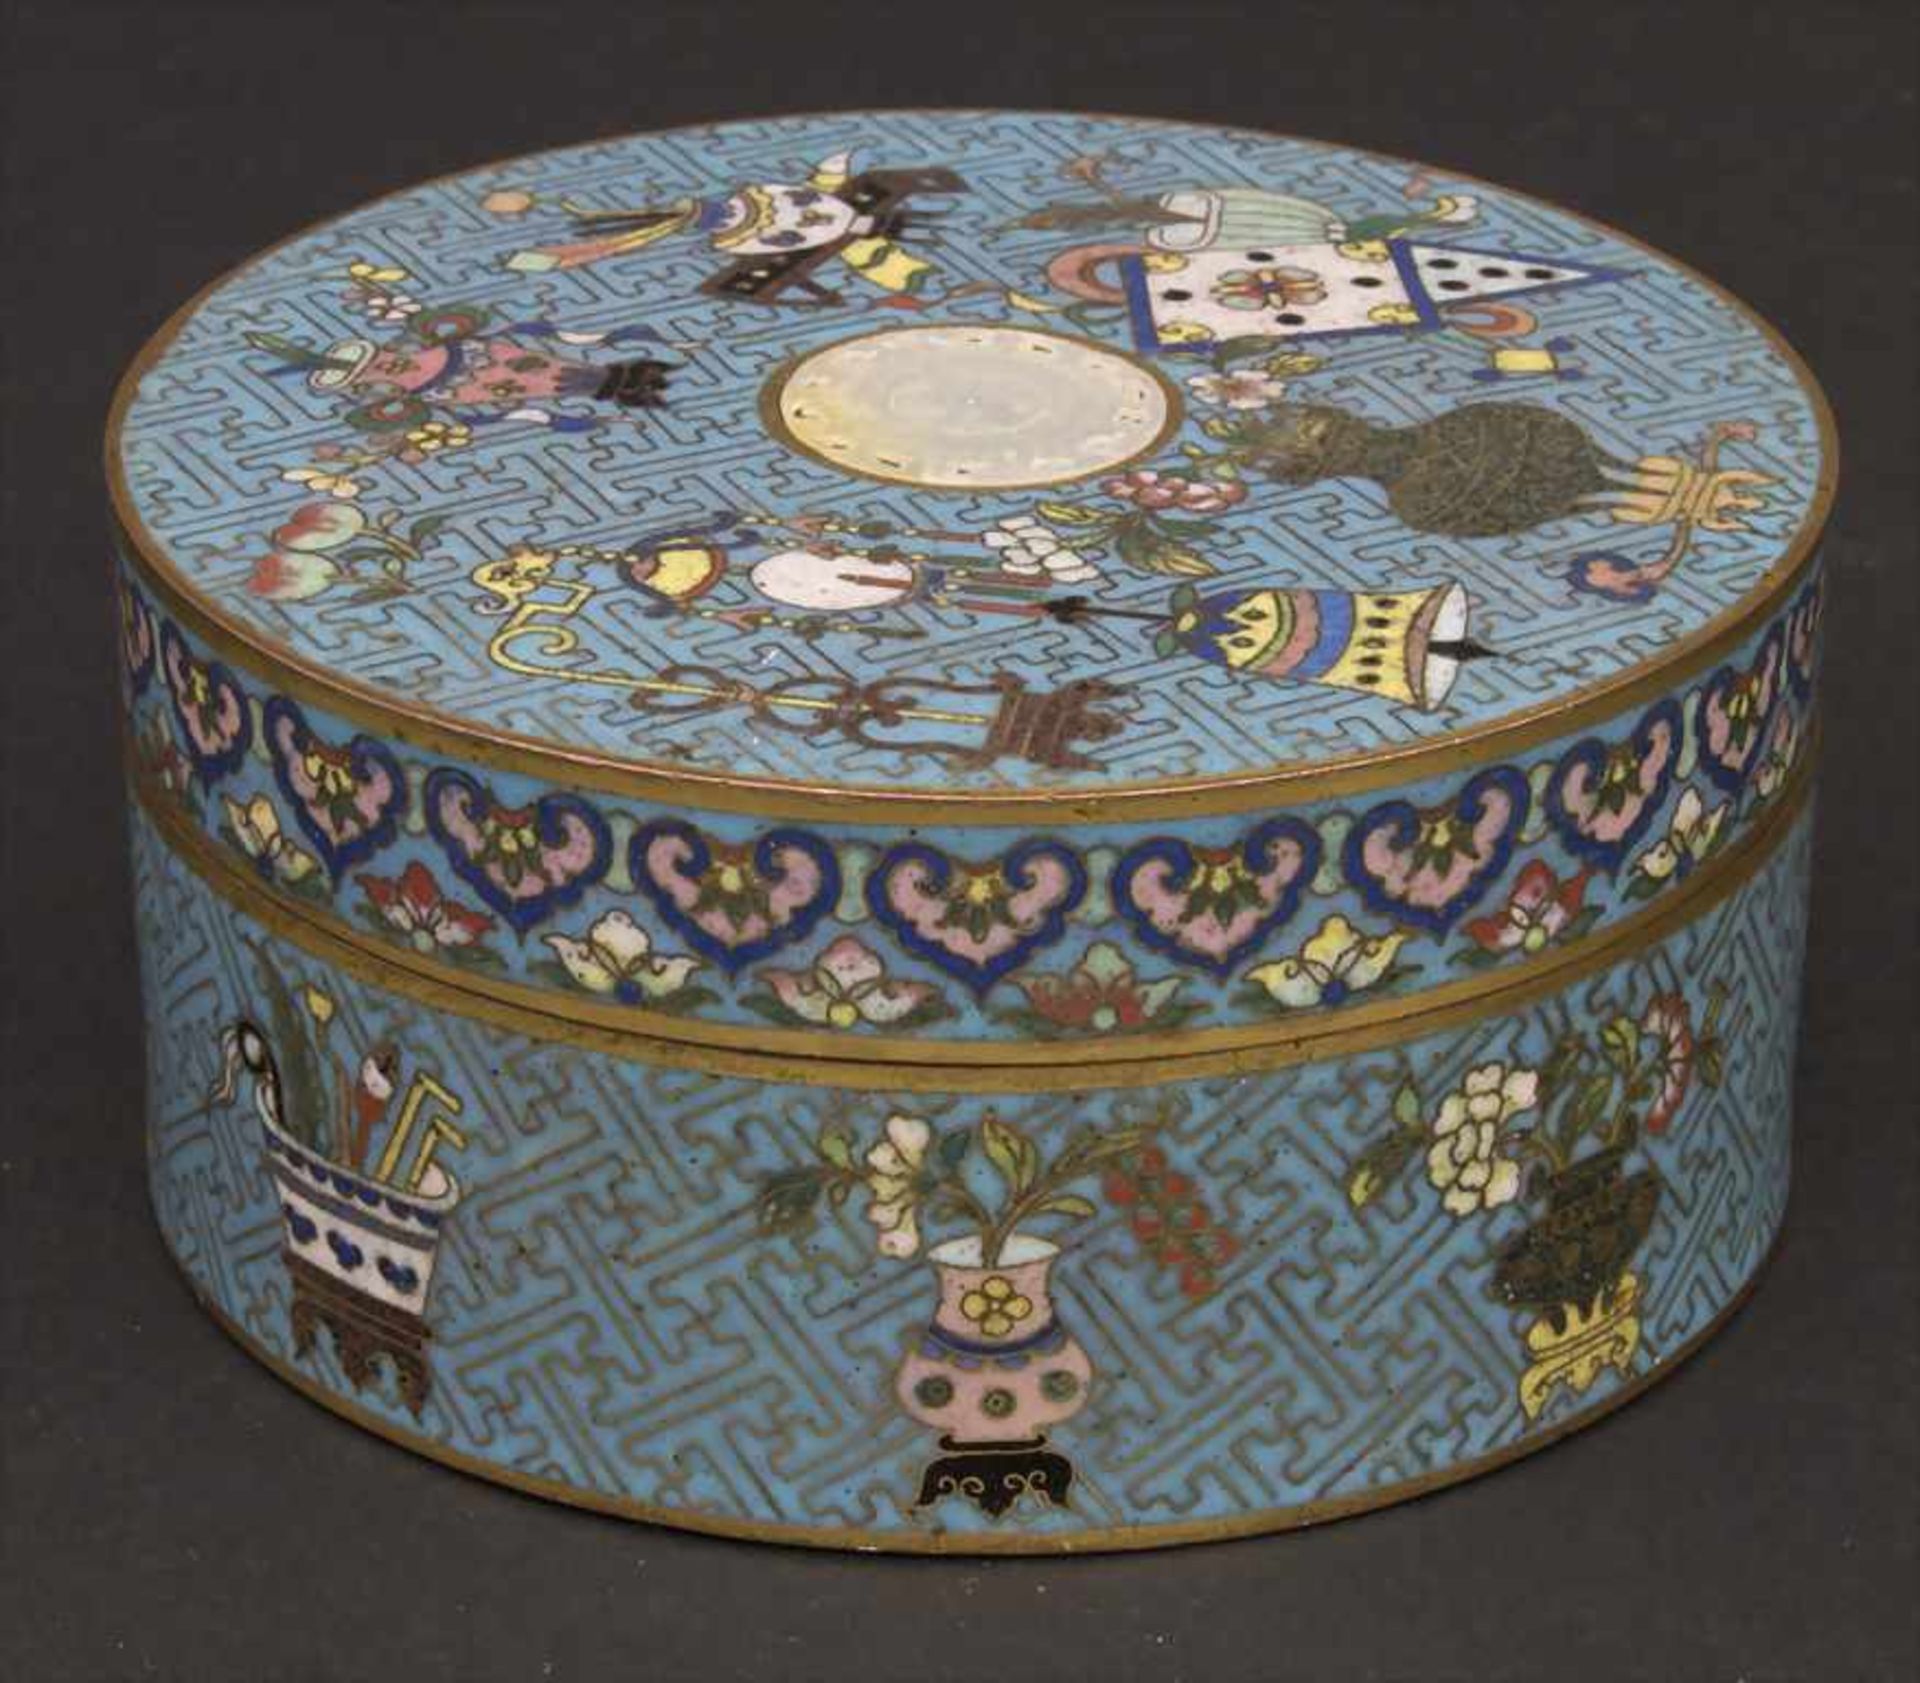 Cloisonné-Deckeldose, China, Qing-Dynastie, 18./19. Jh.< - Image 3 of 7